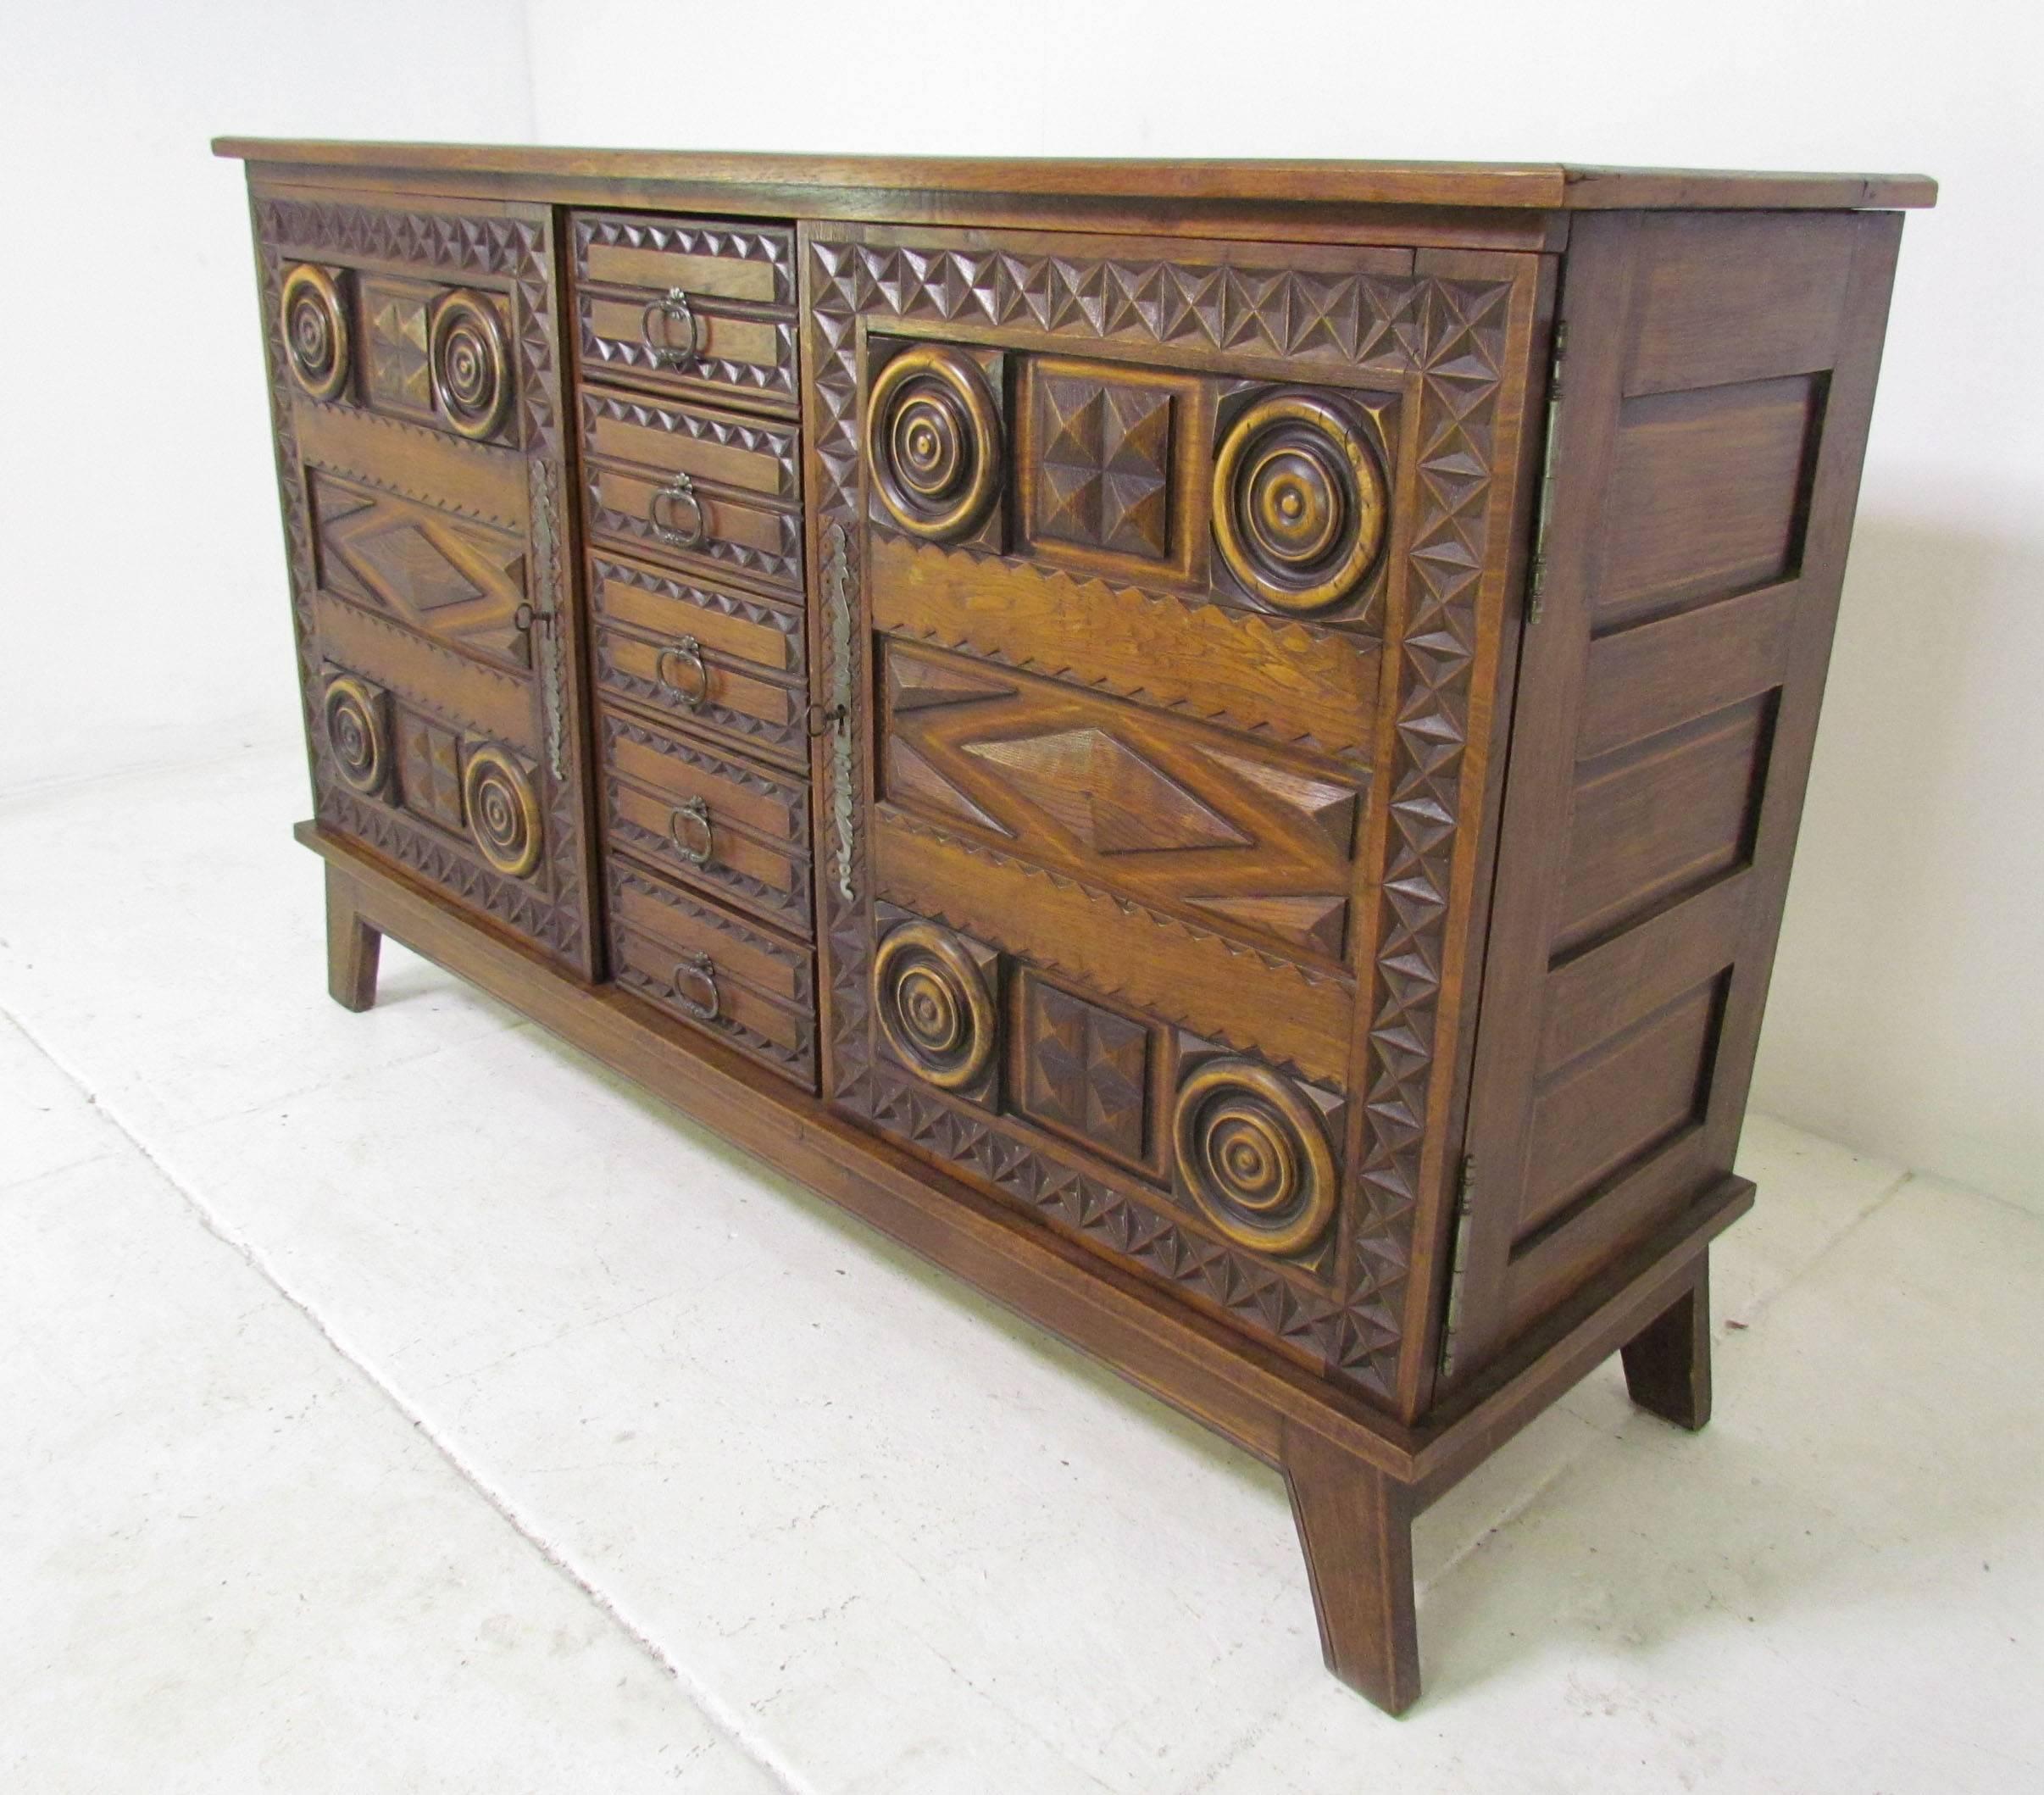 A striking server cabinet in hand-carved oak with geometric decorations. Five center drawers flanked by two doors with shelving space. With original skeleton keys which also function as pulls for the doors.